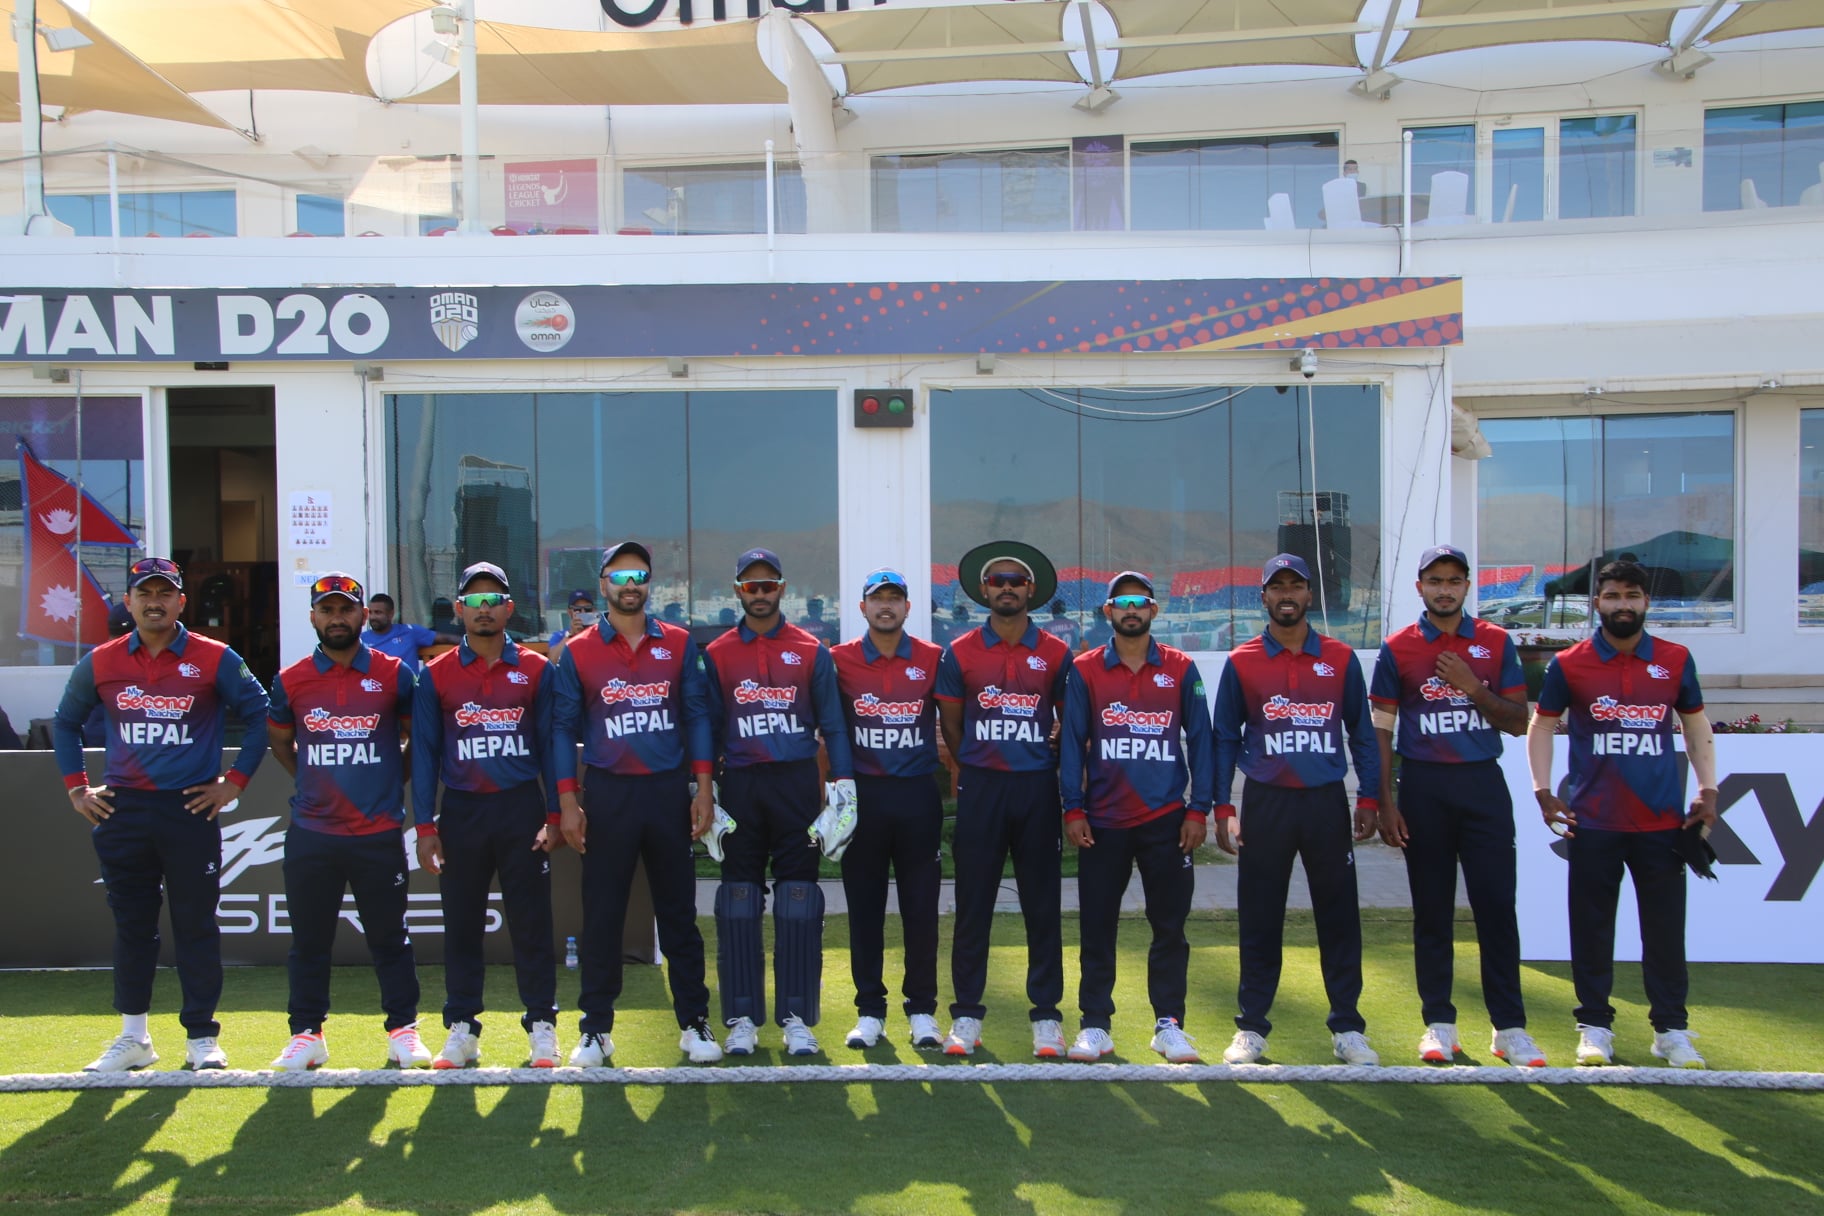 Nepal’s dream to play T20 world cup shattered after losing to UAE in global qualifier semi-final